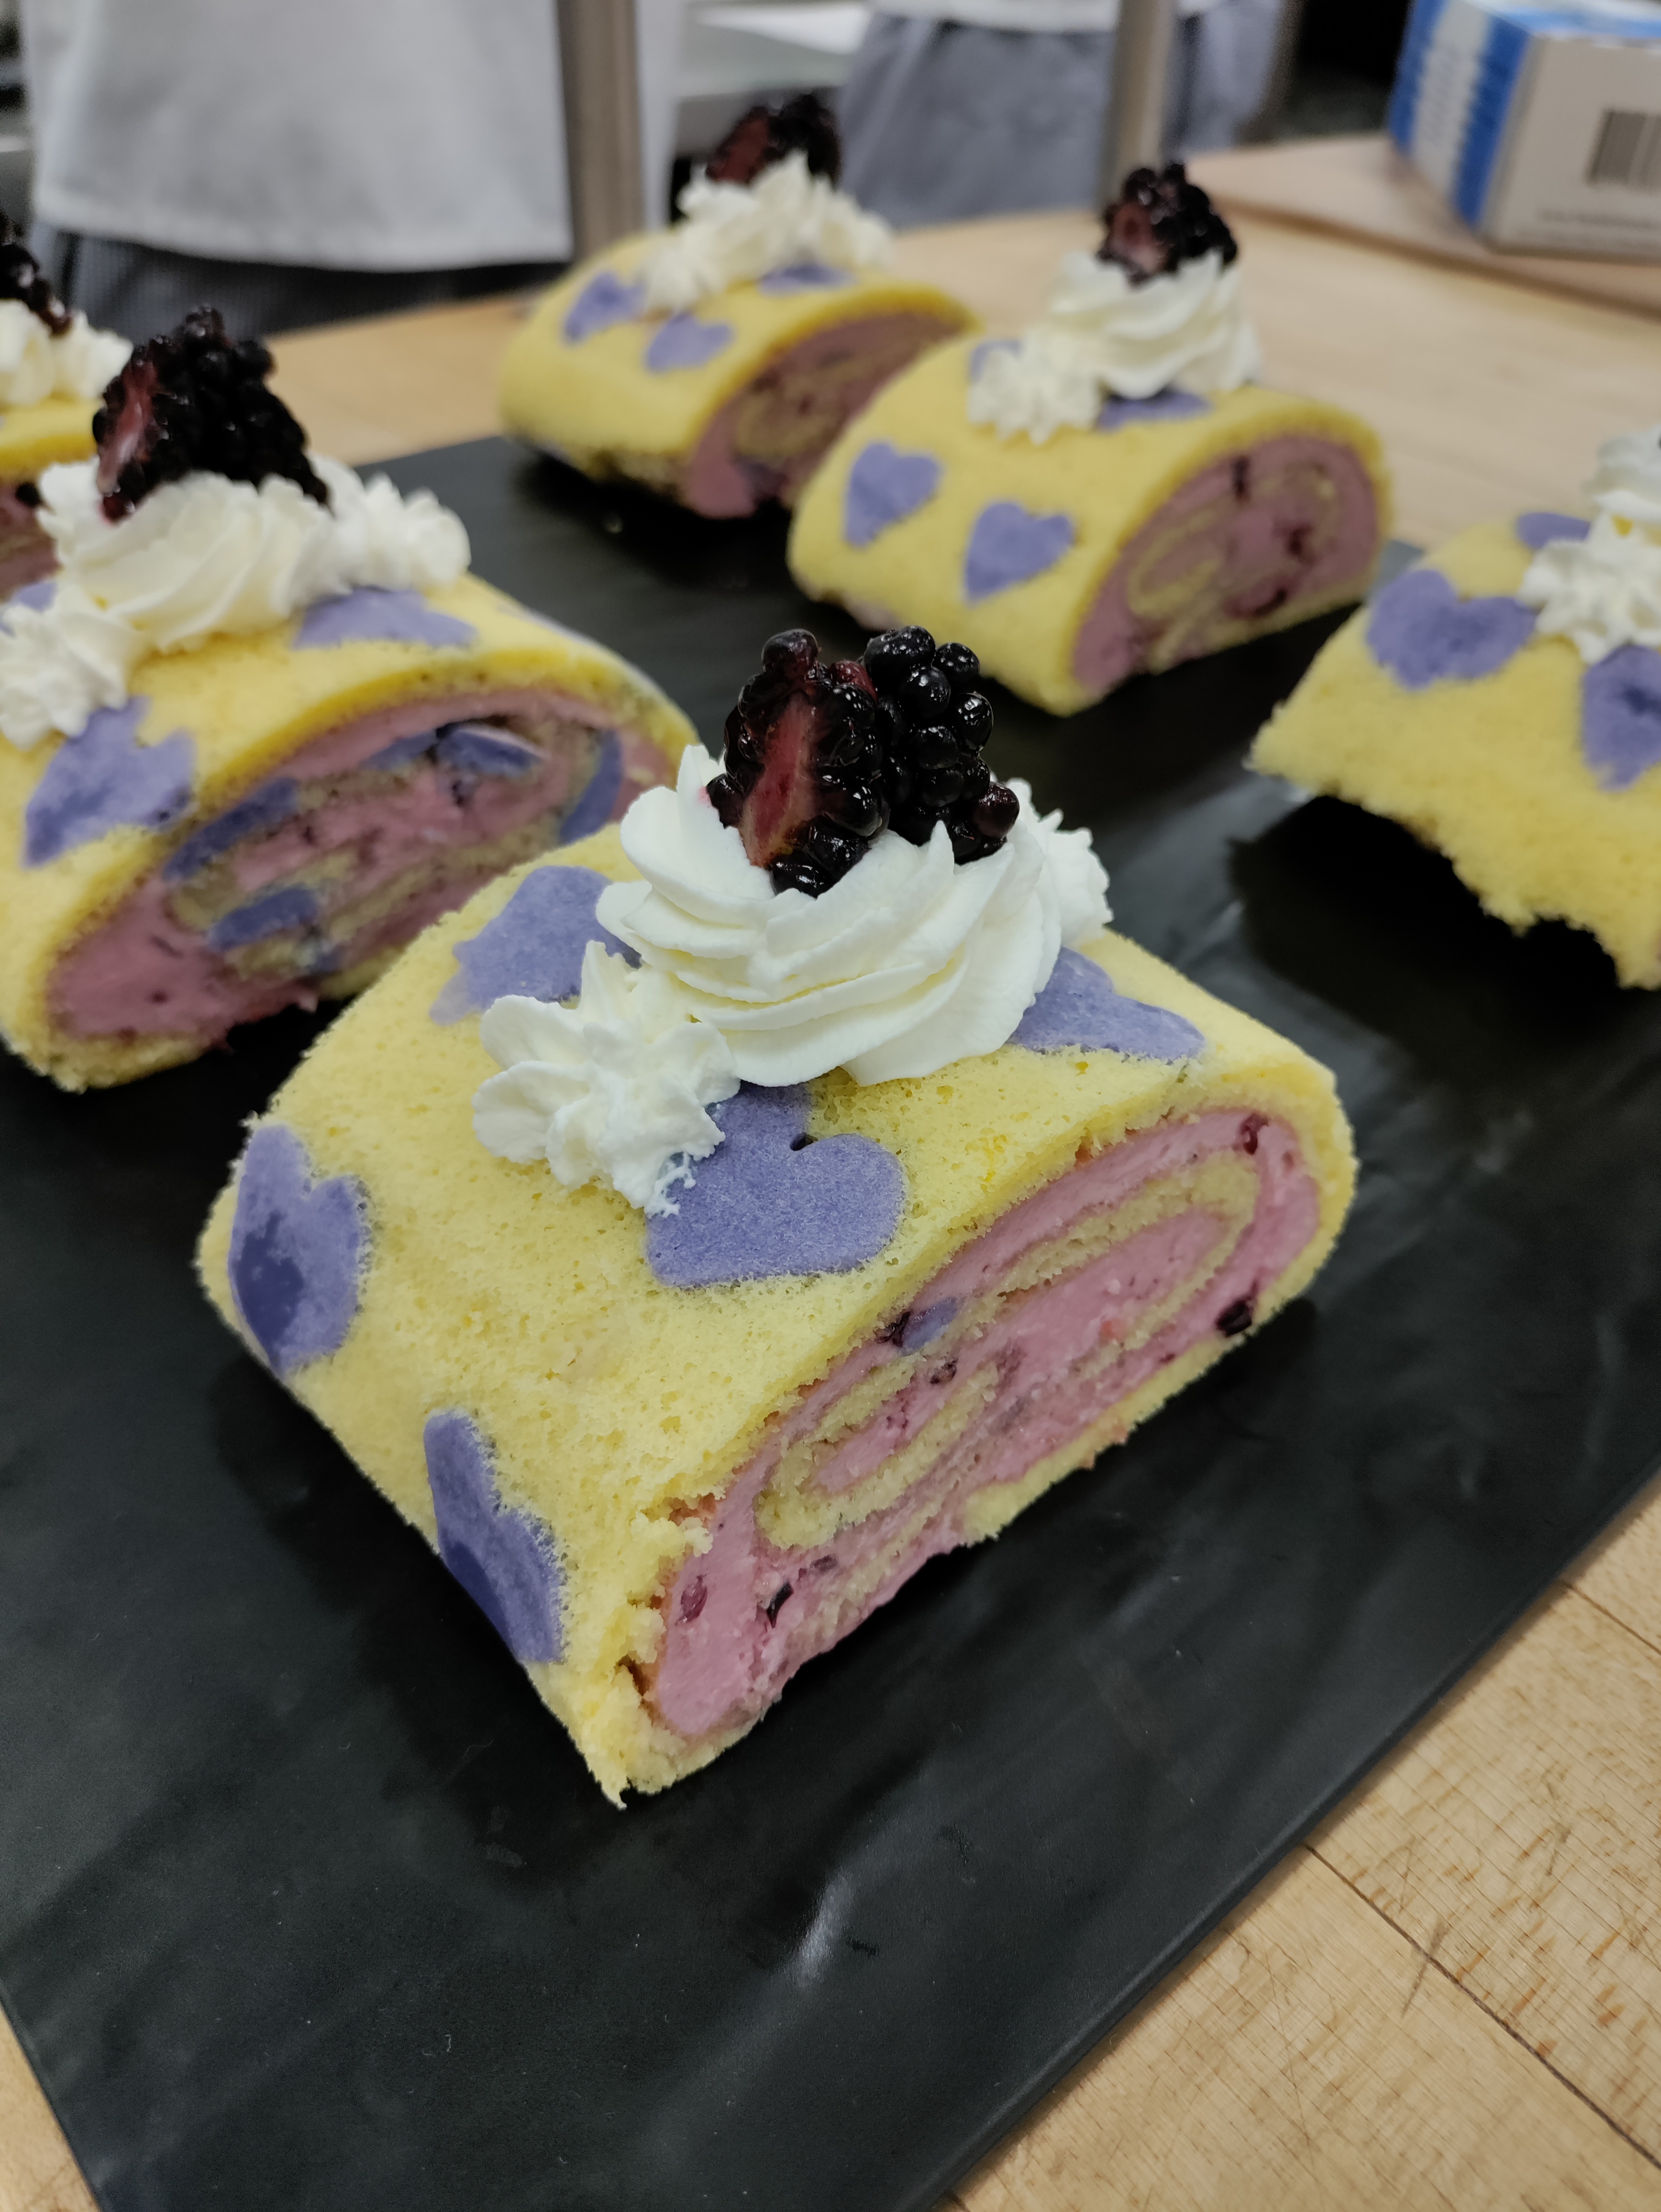 a yellow swiss roll cake lined with purple hearts and filled with a purple mousse swirl, garnished with whipped cream and two split halves of a blackberry